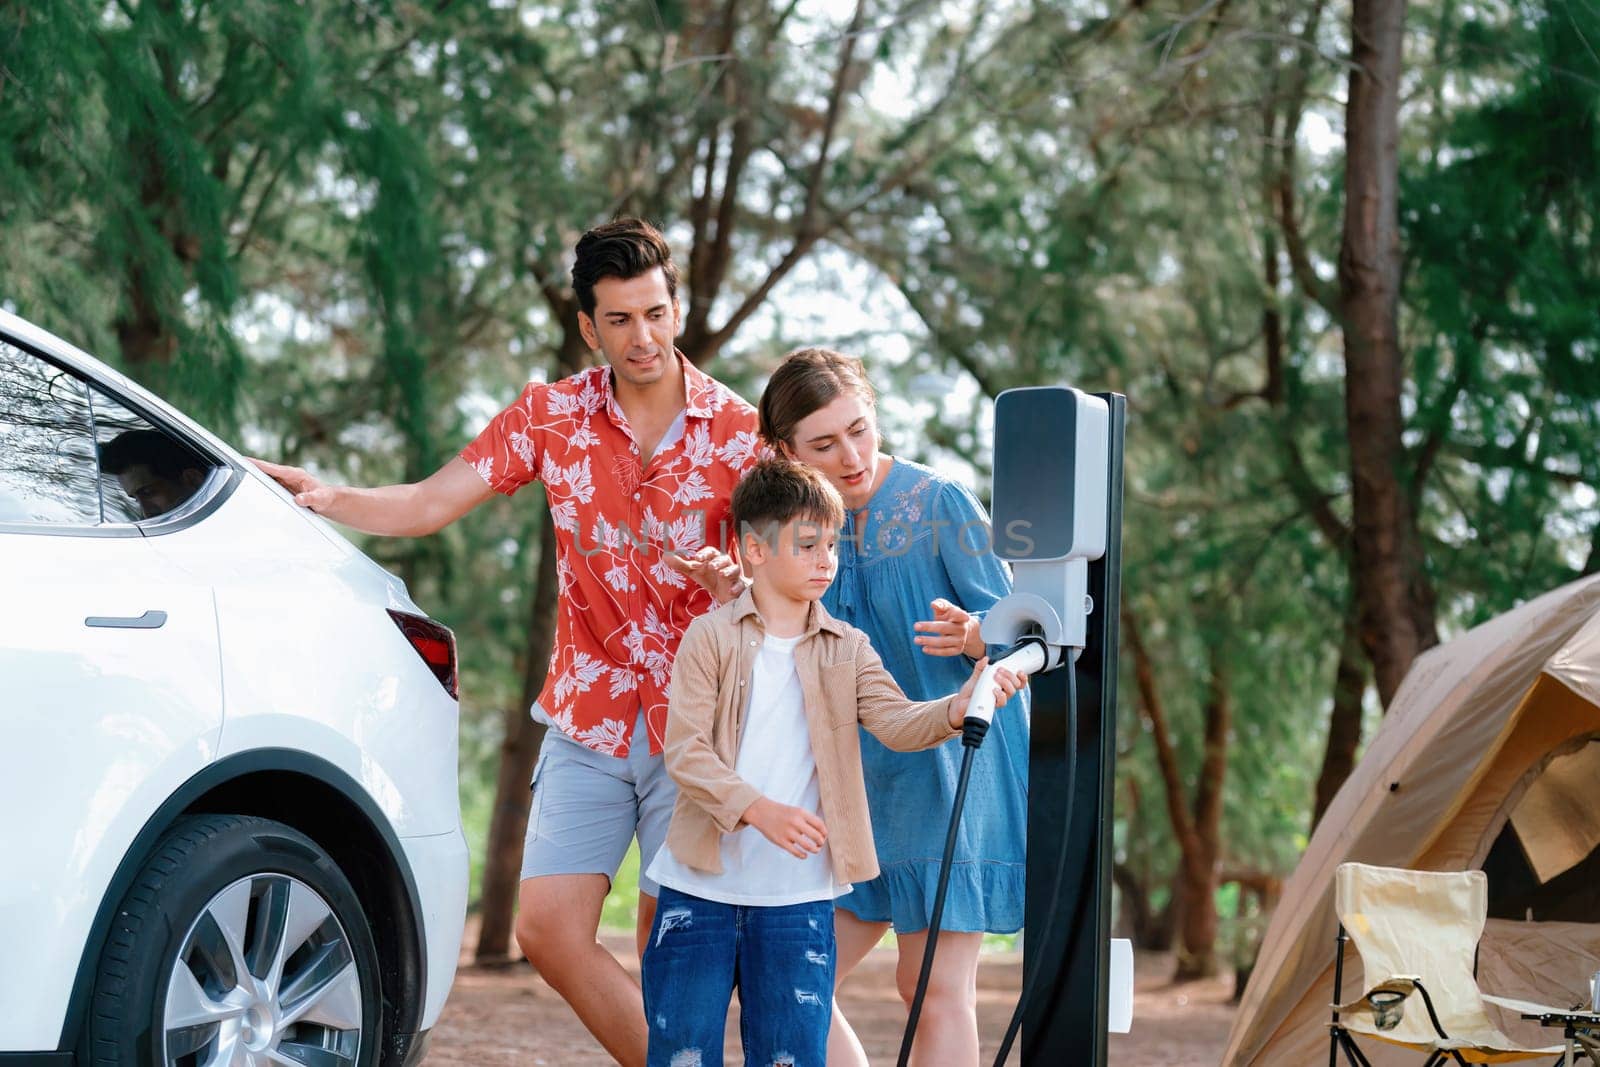 Lovely family recharge EV car with EV charging station in campsite. Perpetual by biancoblue